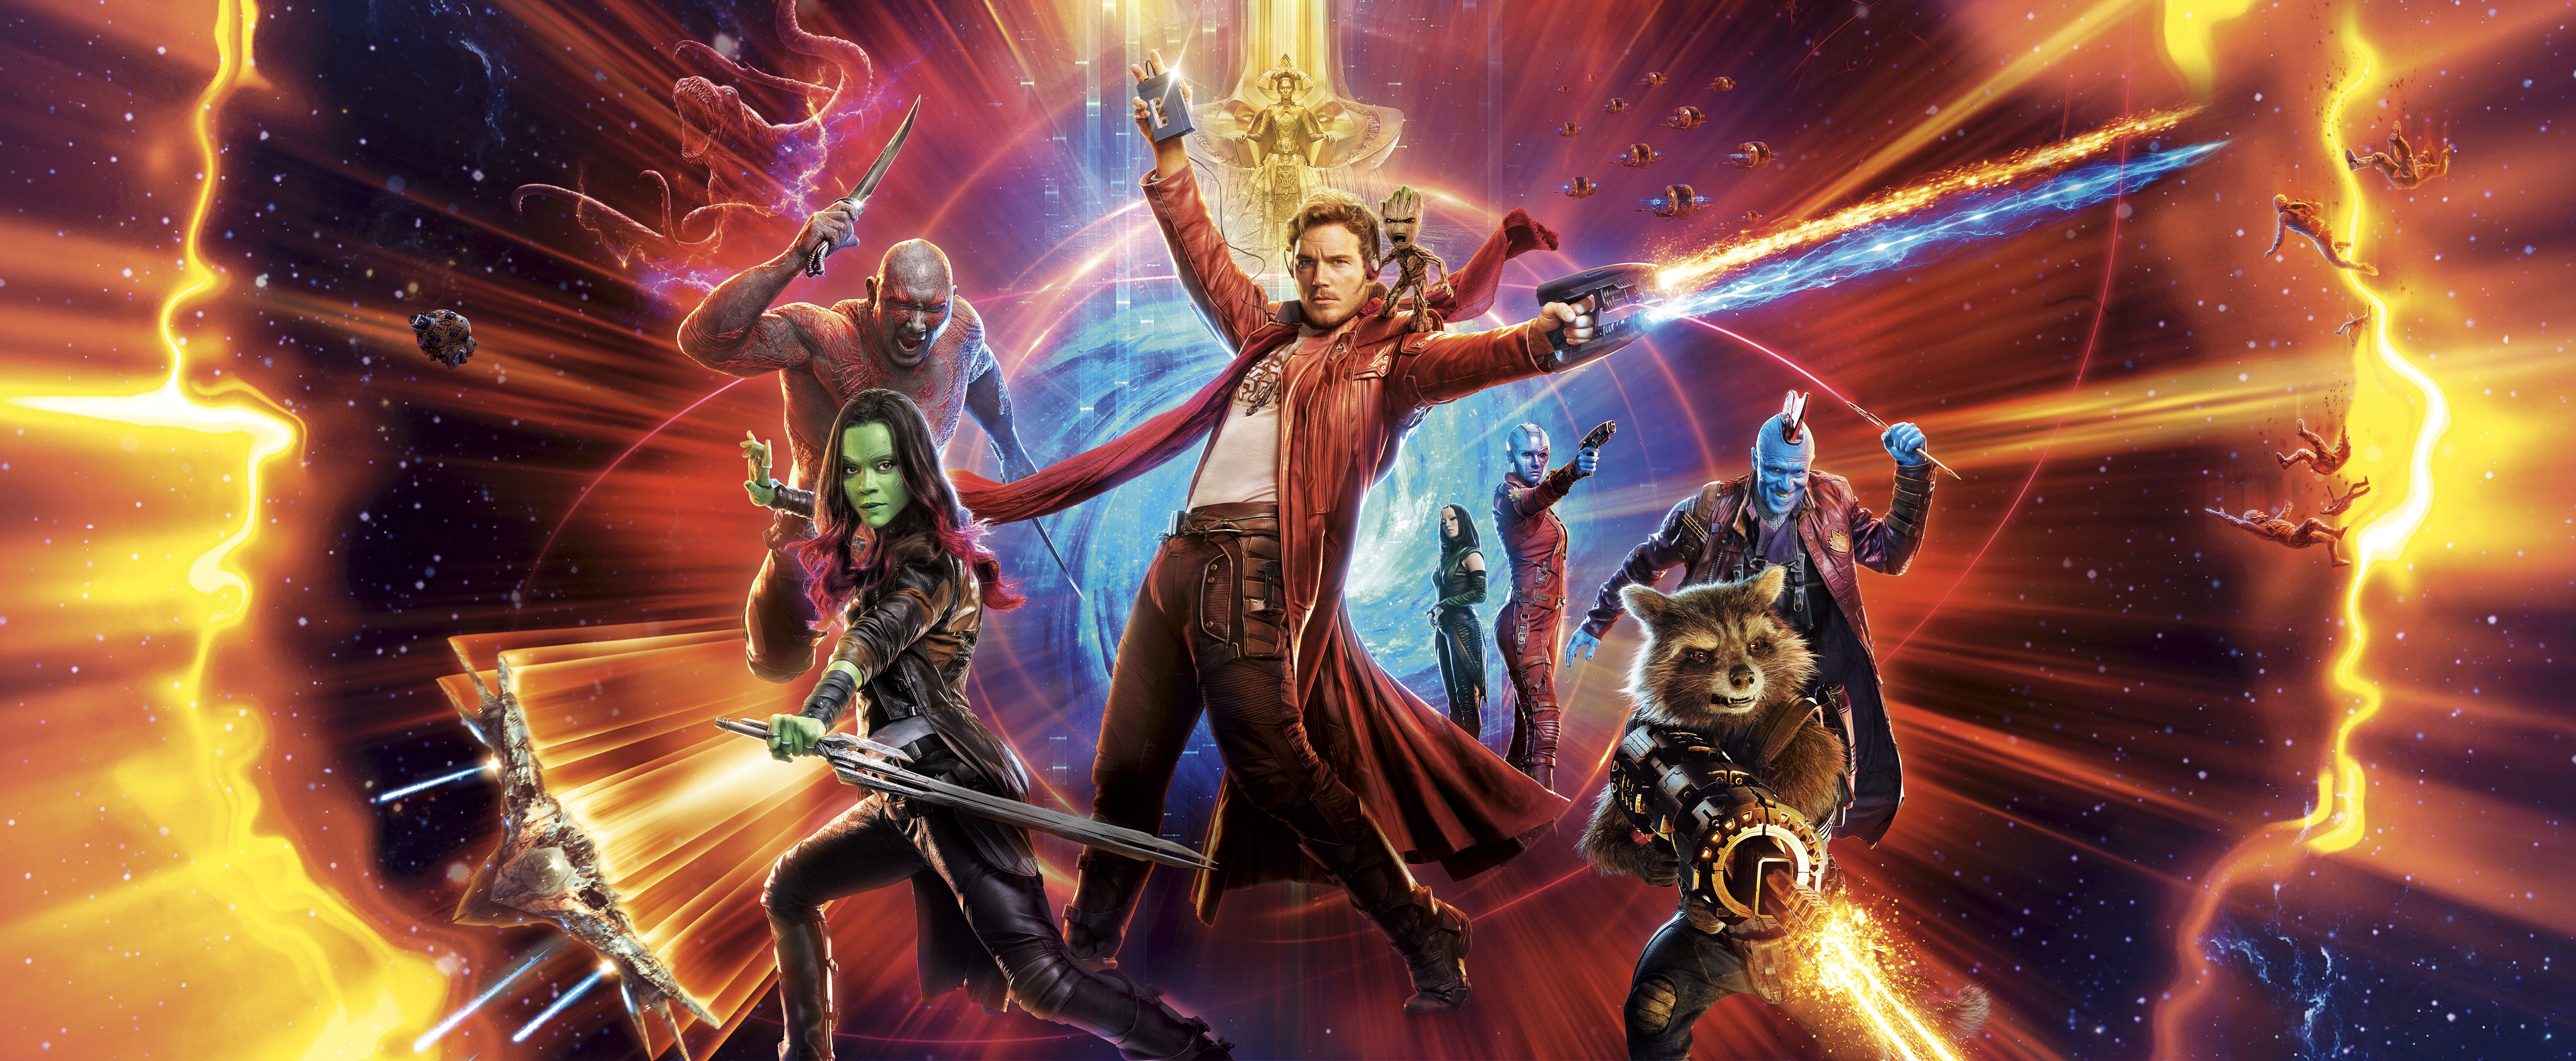 Guardians Of The Galaxy Vol 2 Empire Cover Wallpapers